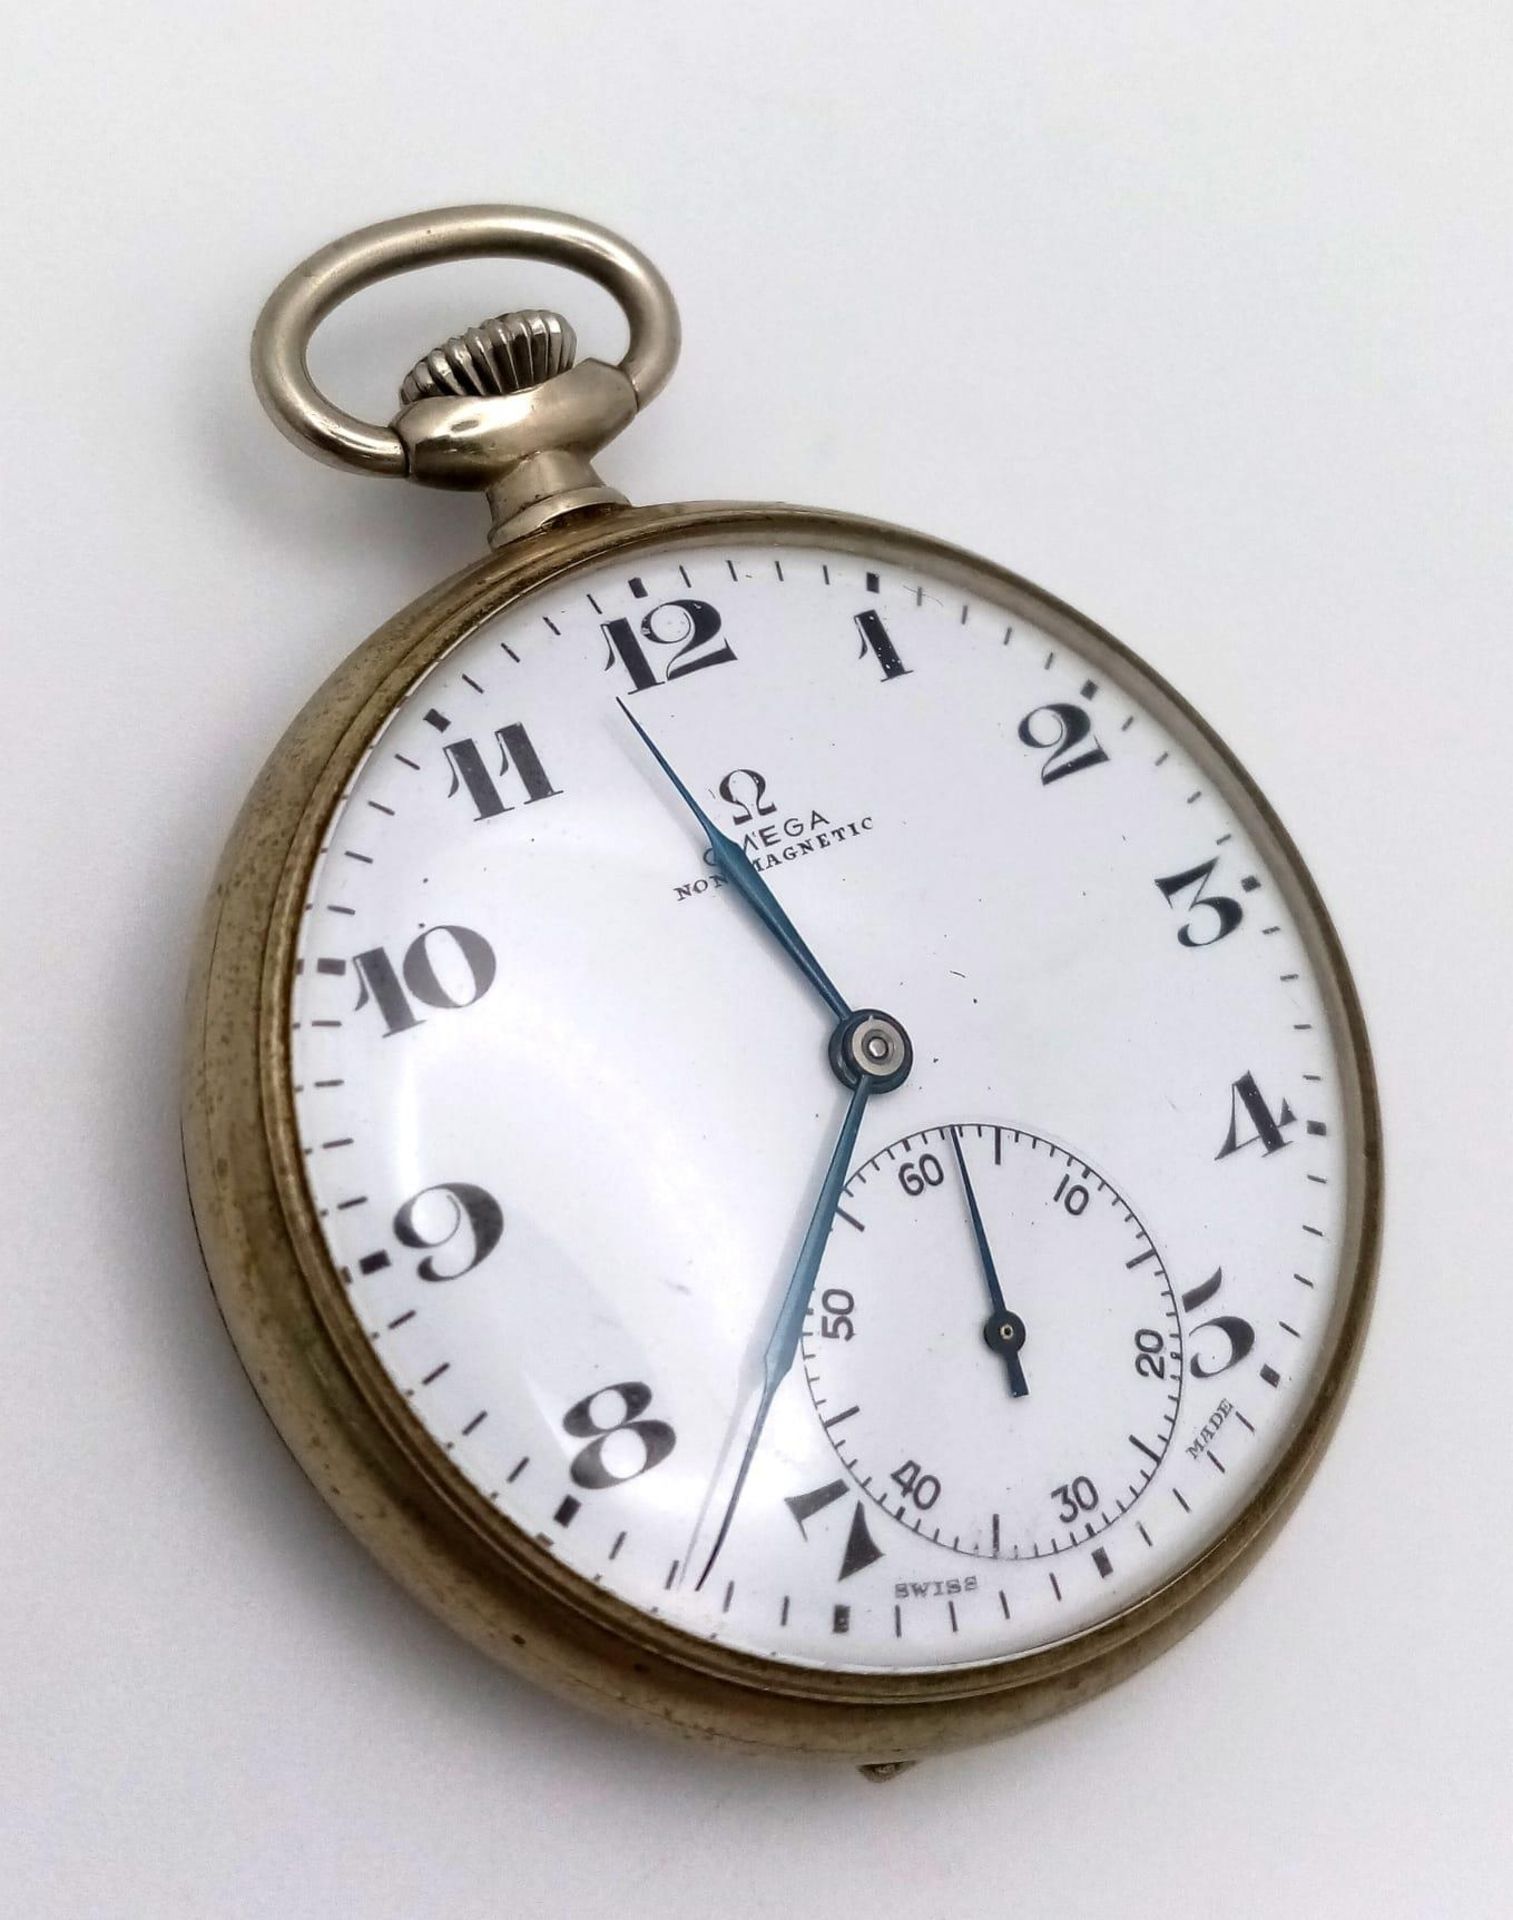 A Vintage Omega Pocket Watch. Stainless steel case with top winder. White dial with second sub dial.